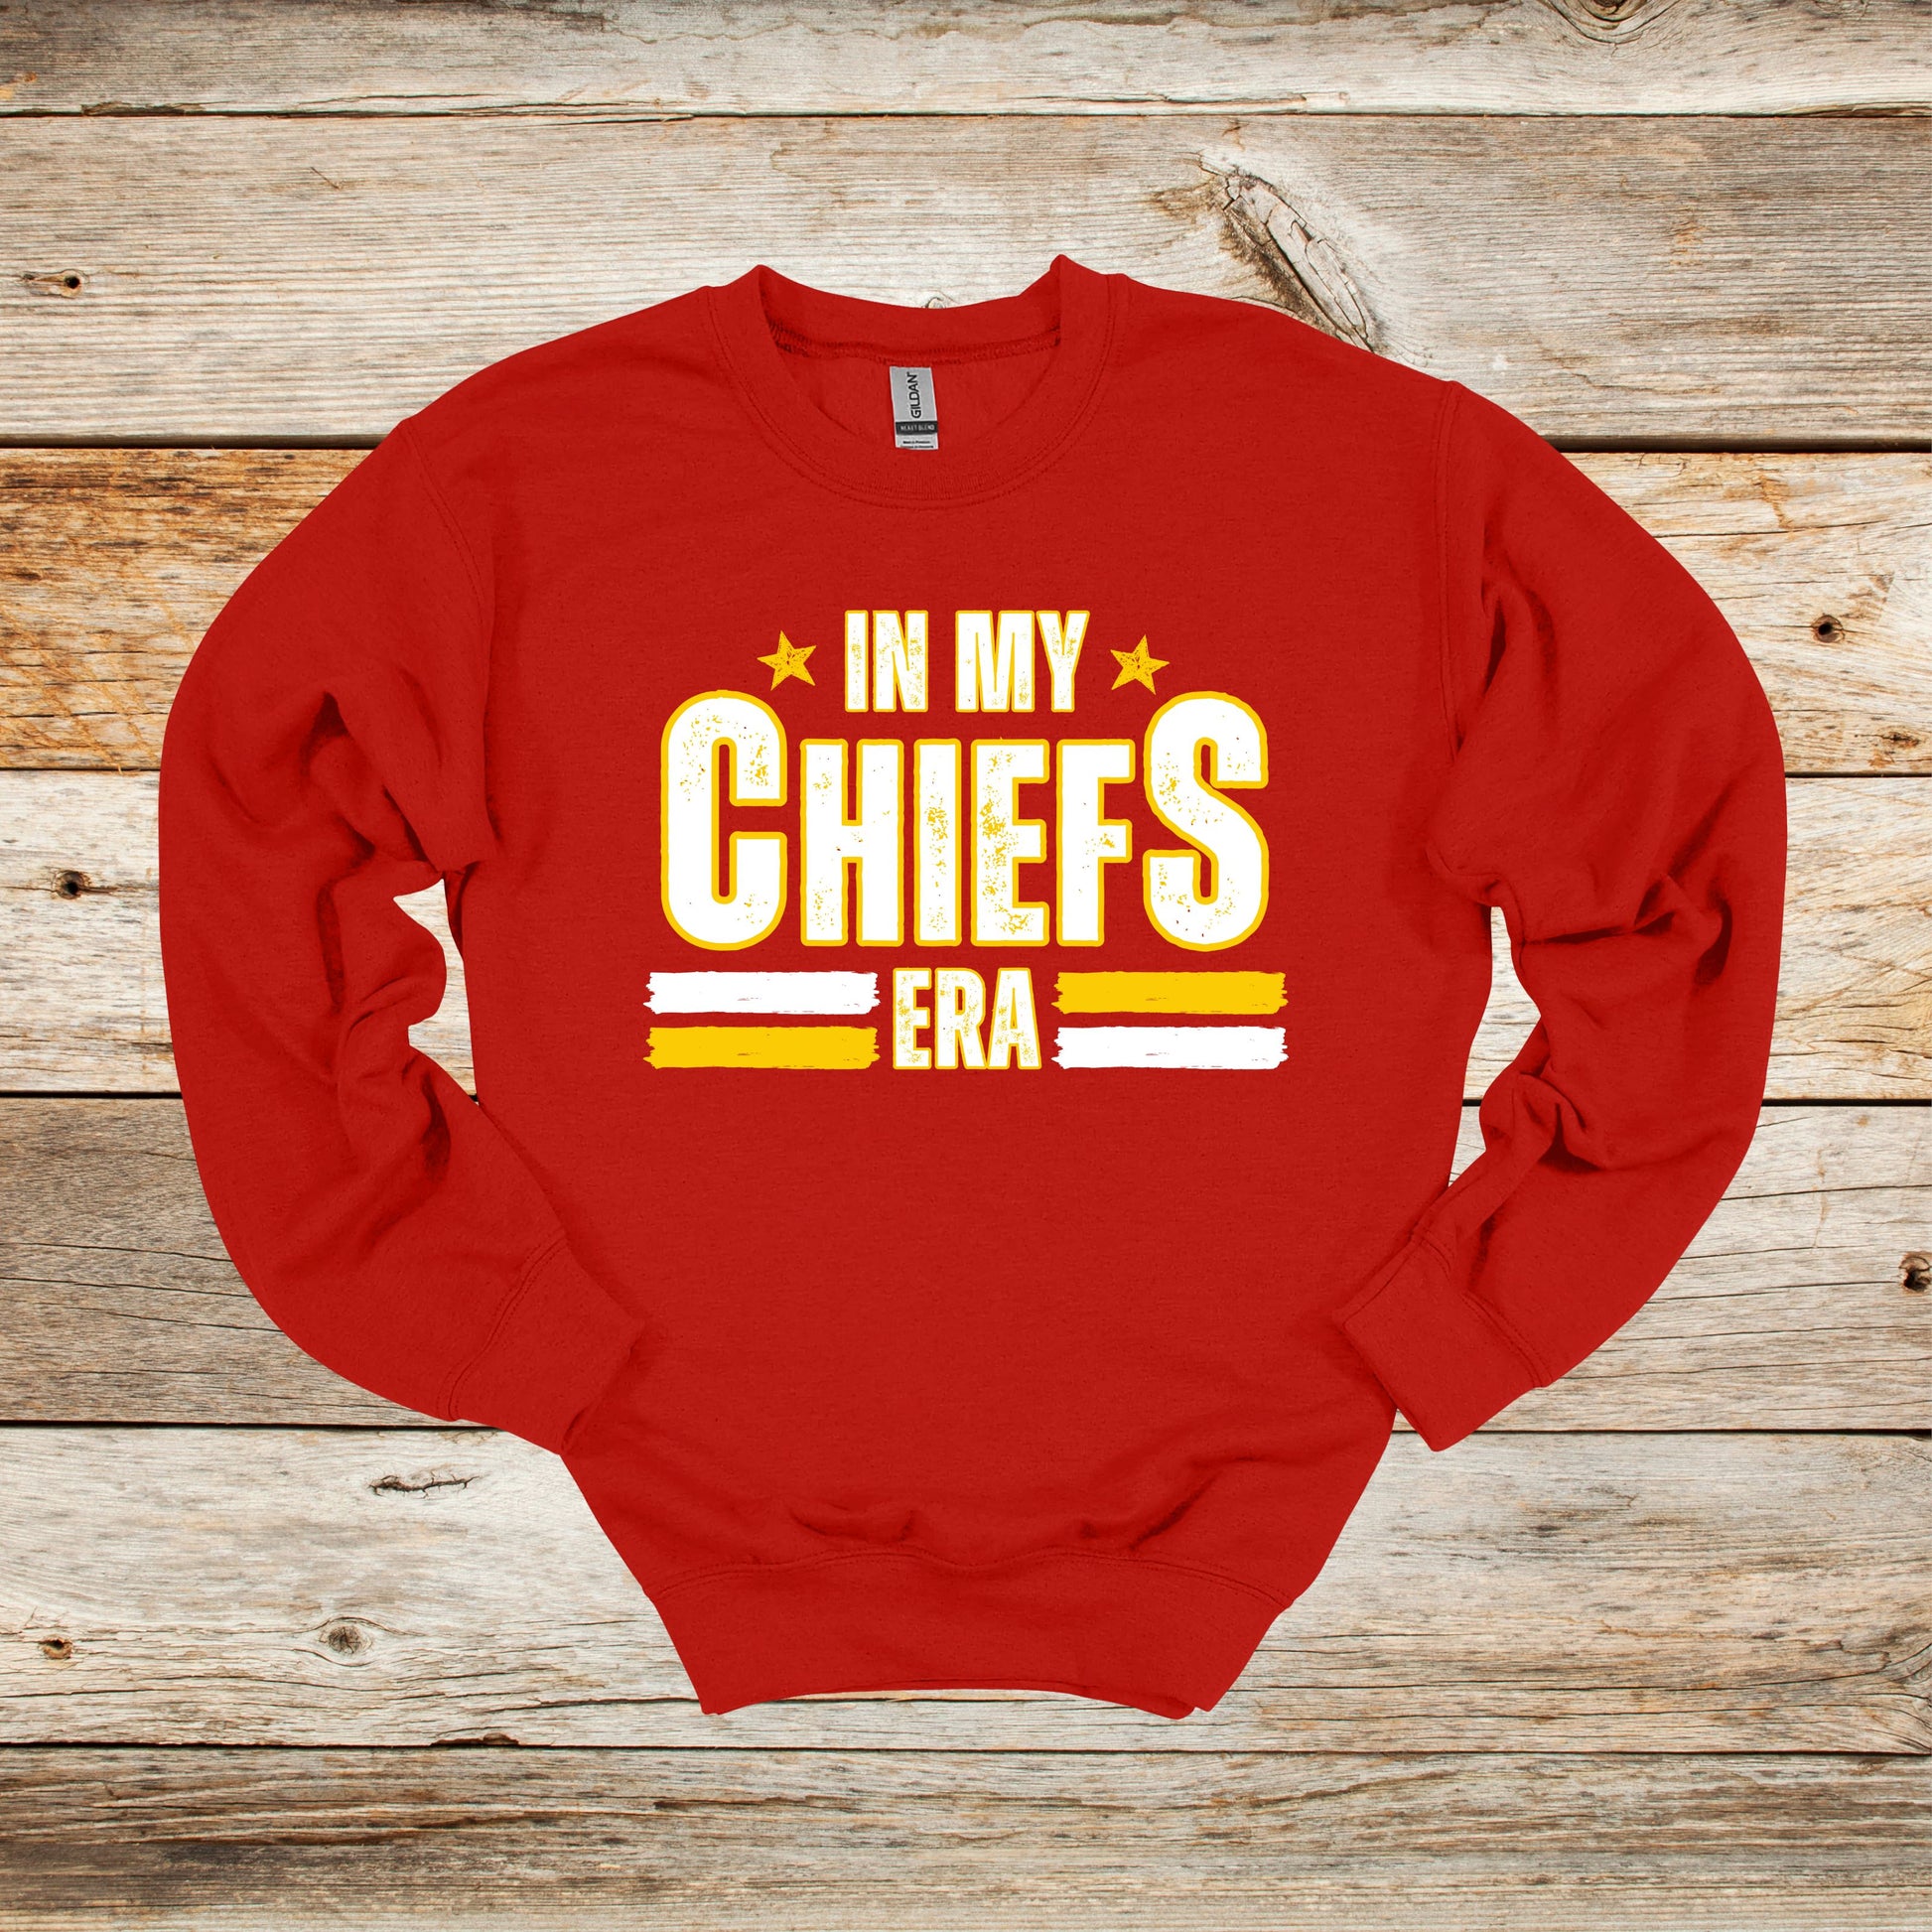 Football Crewneck and Hooded Sweatshirt - Chiefs Football - In My Chiefs Era - Adult and Children's Tee Shirts - Sports Hooded Sweatshirt Graphic Avenue Crewneck Sweatshirt Red Adult Small